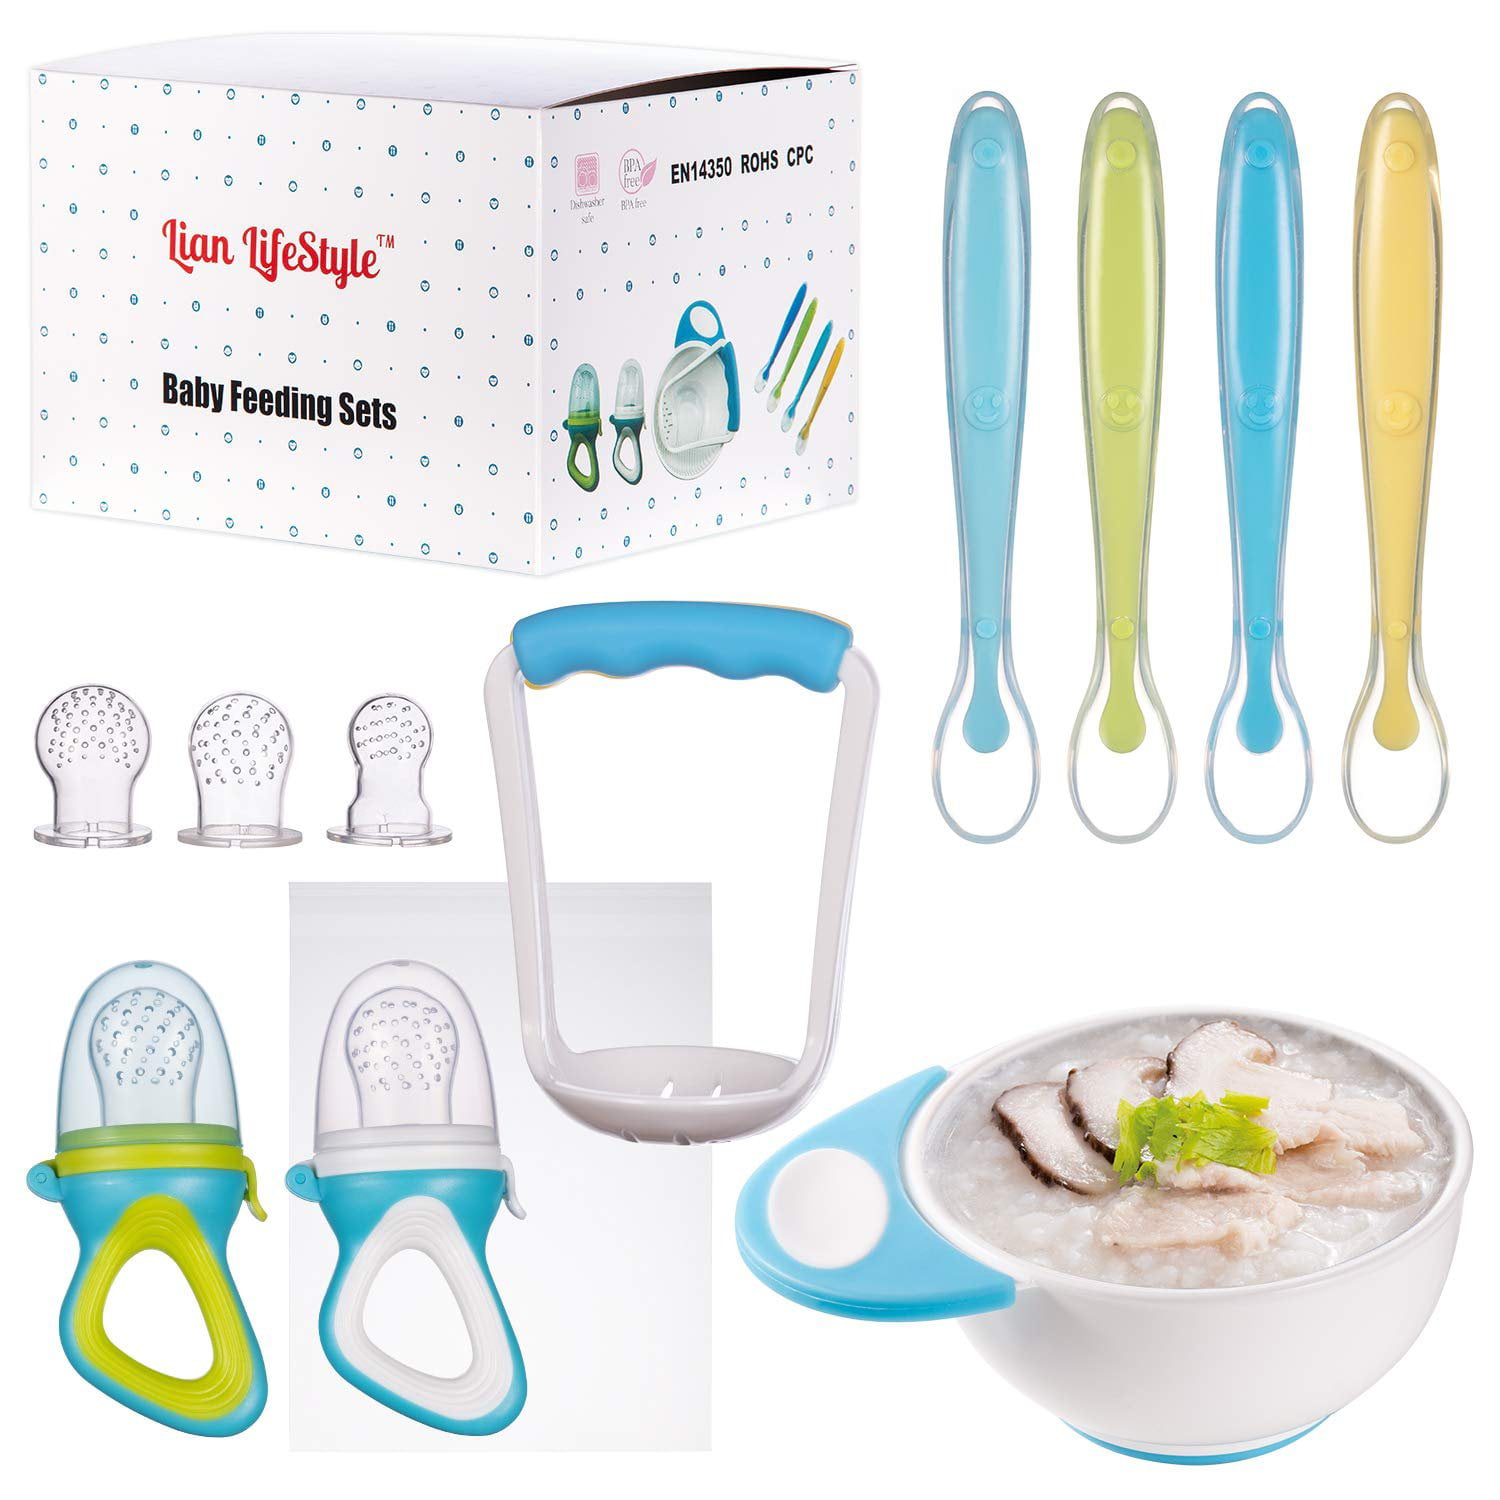 Baby Feeding Supplies - Quality Solutions for Happy and Healthy